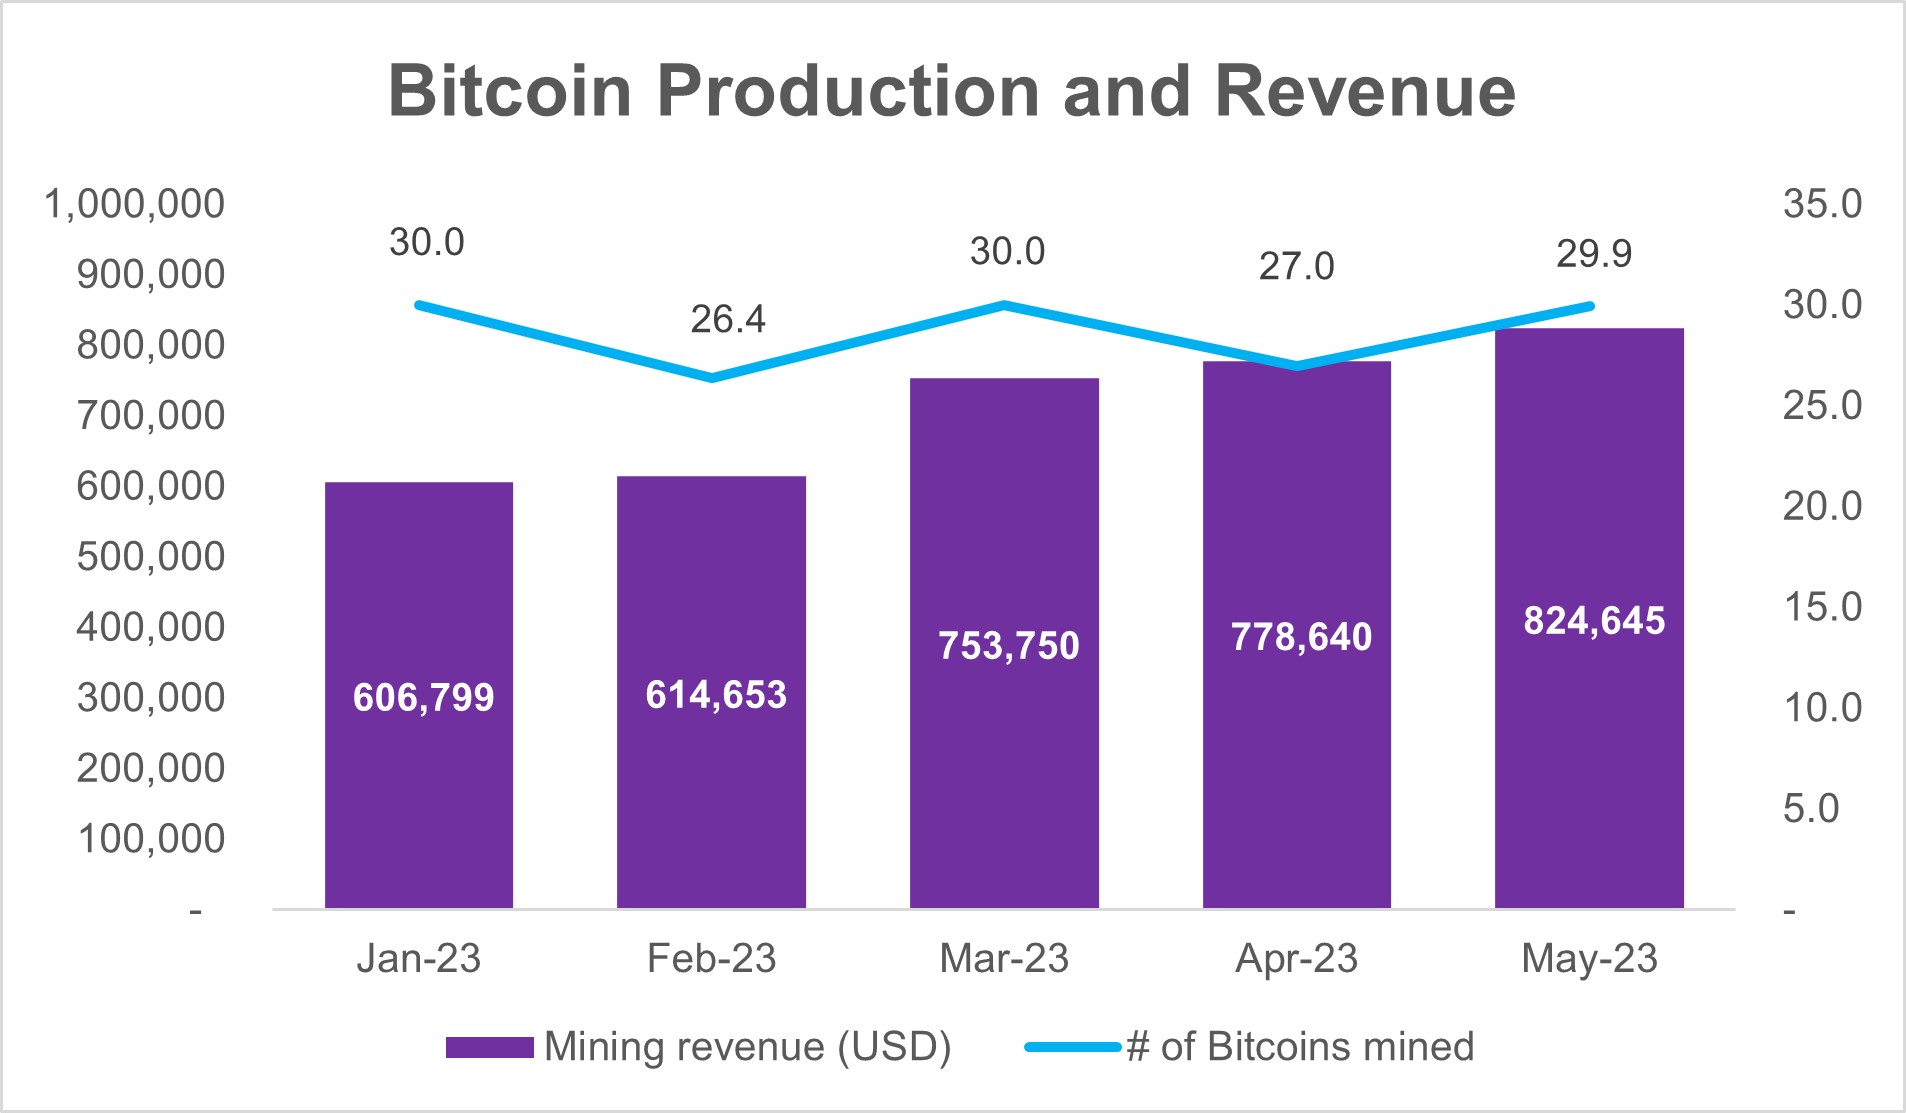 29.9 Bitcoins Mined and Revenue of $824,645